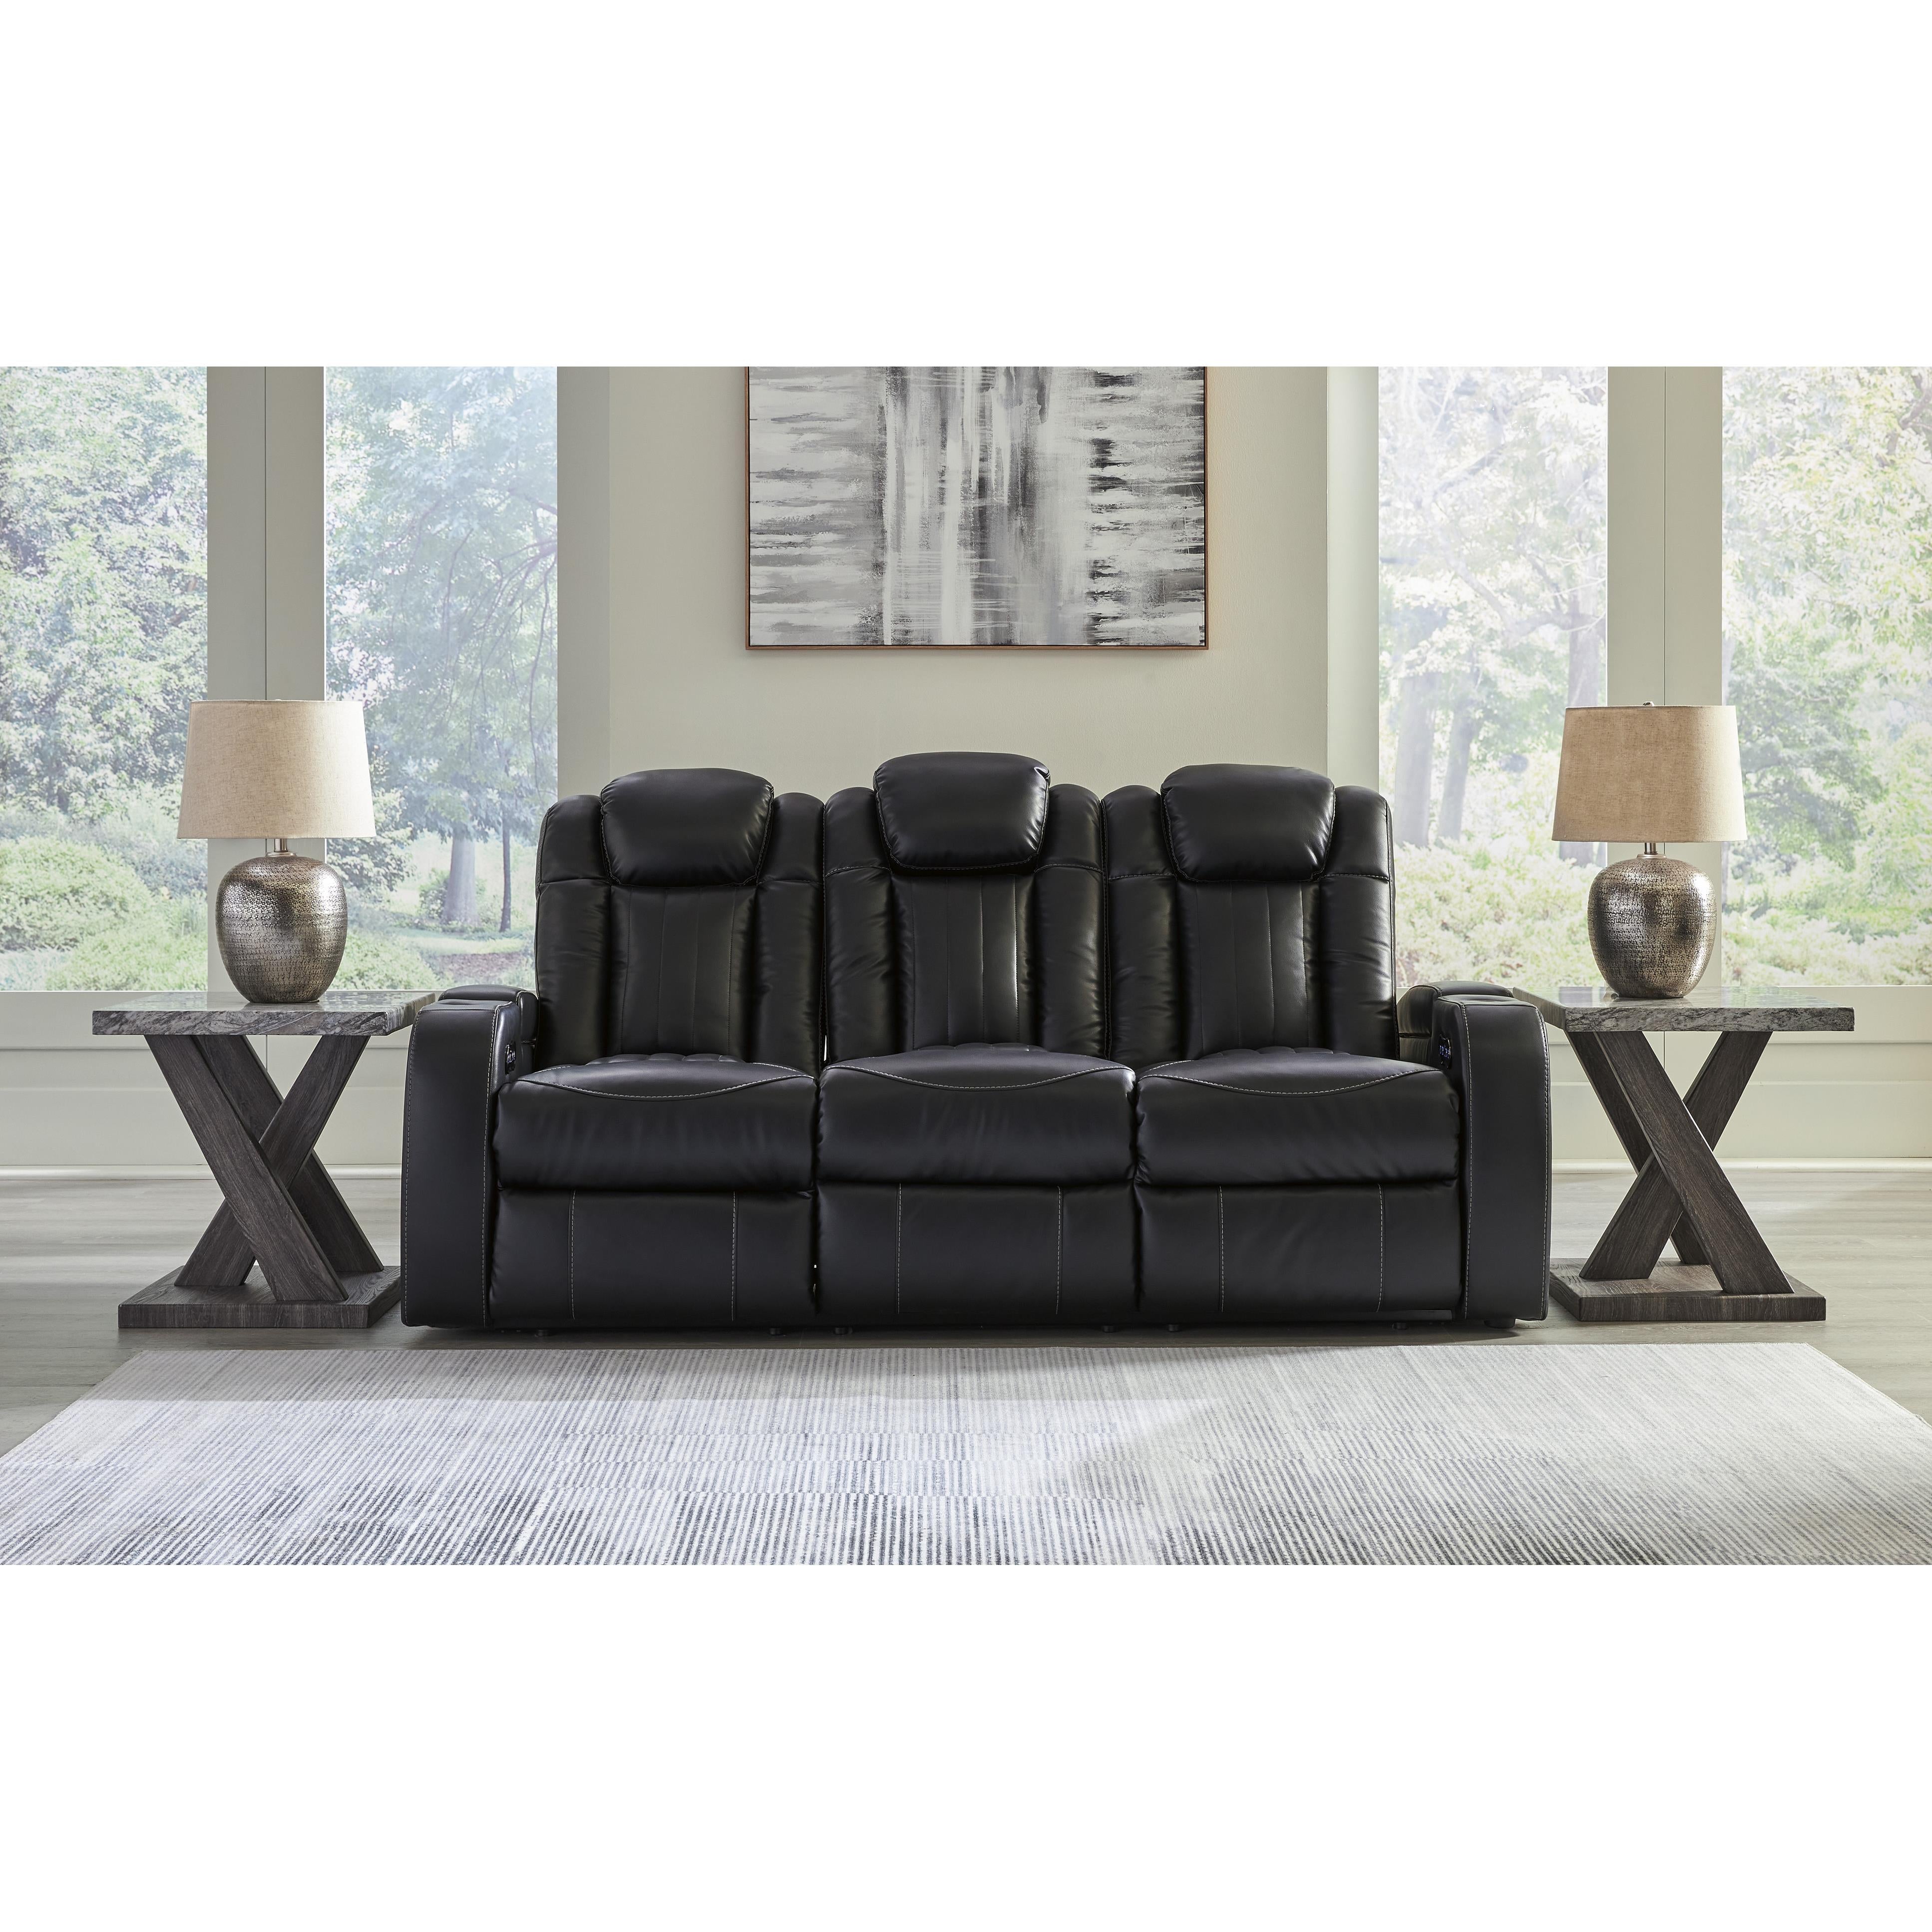 Signature Design by Ashley Caveman Den Power Reclining Leather Look Sofa 9070315 IMAGE 6